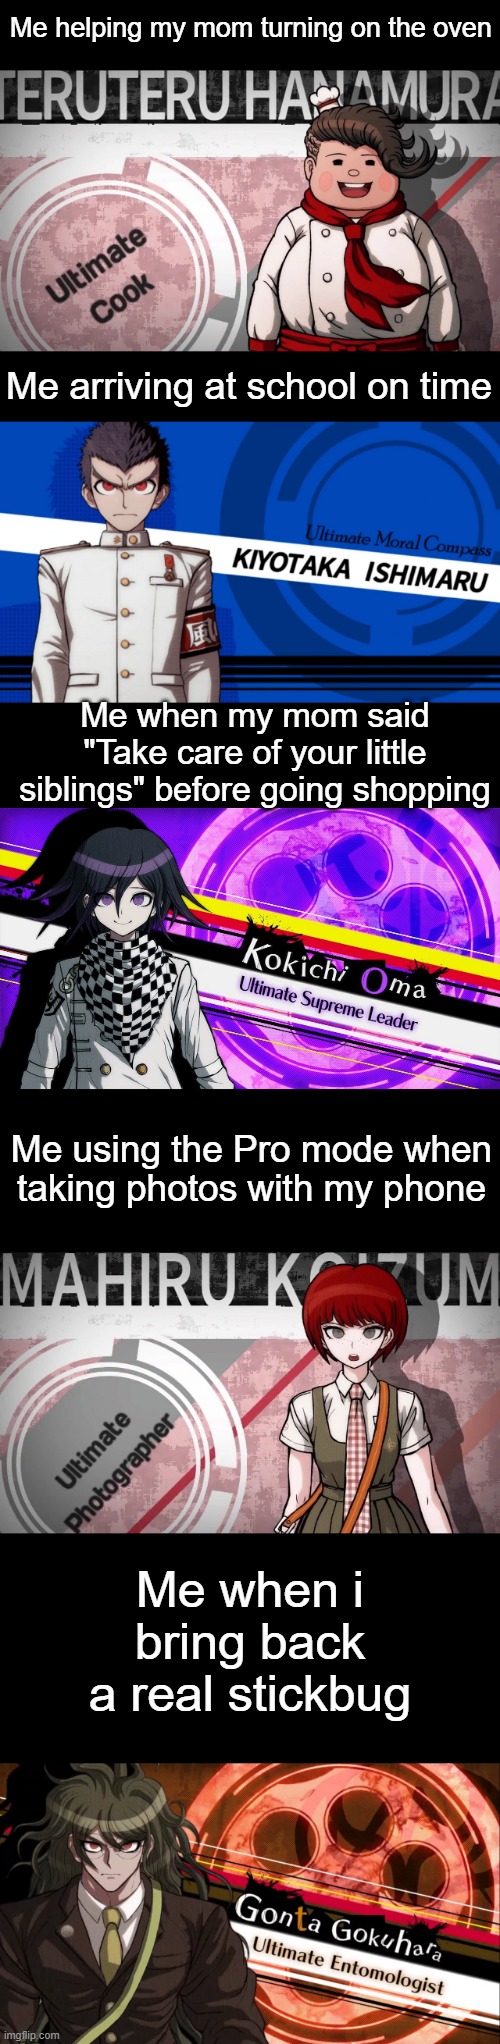 Danganronpa Ultimate Memes pt.2 | Me helping my mom turning on the oven; Me arriving at school on time; Me when my mom said "Take care of your little siblings" before going shopping; Me using the Pro mode when taking photos with my phone; Me when i bring back a real stickbug | image tagged in danganronpa | made w/ Imgflip meme maker